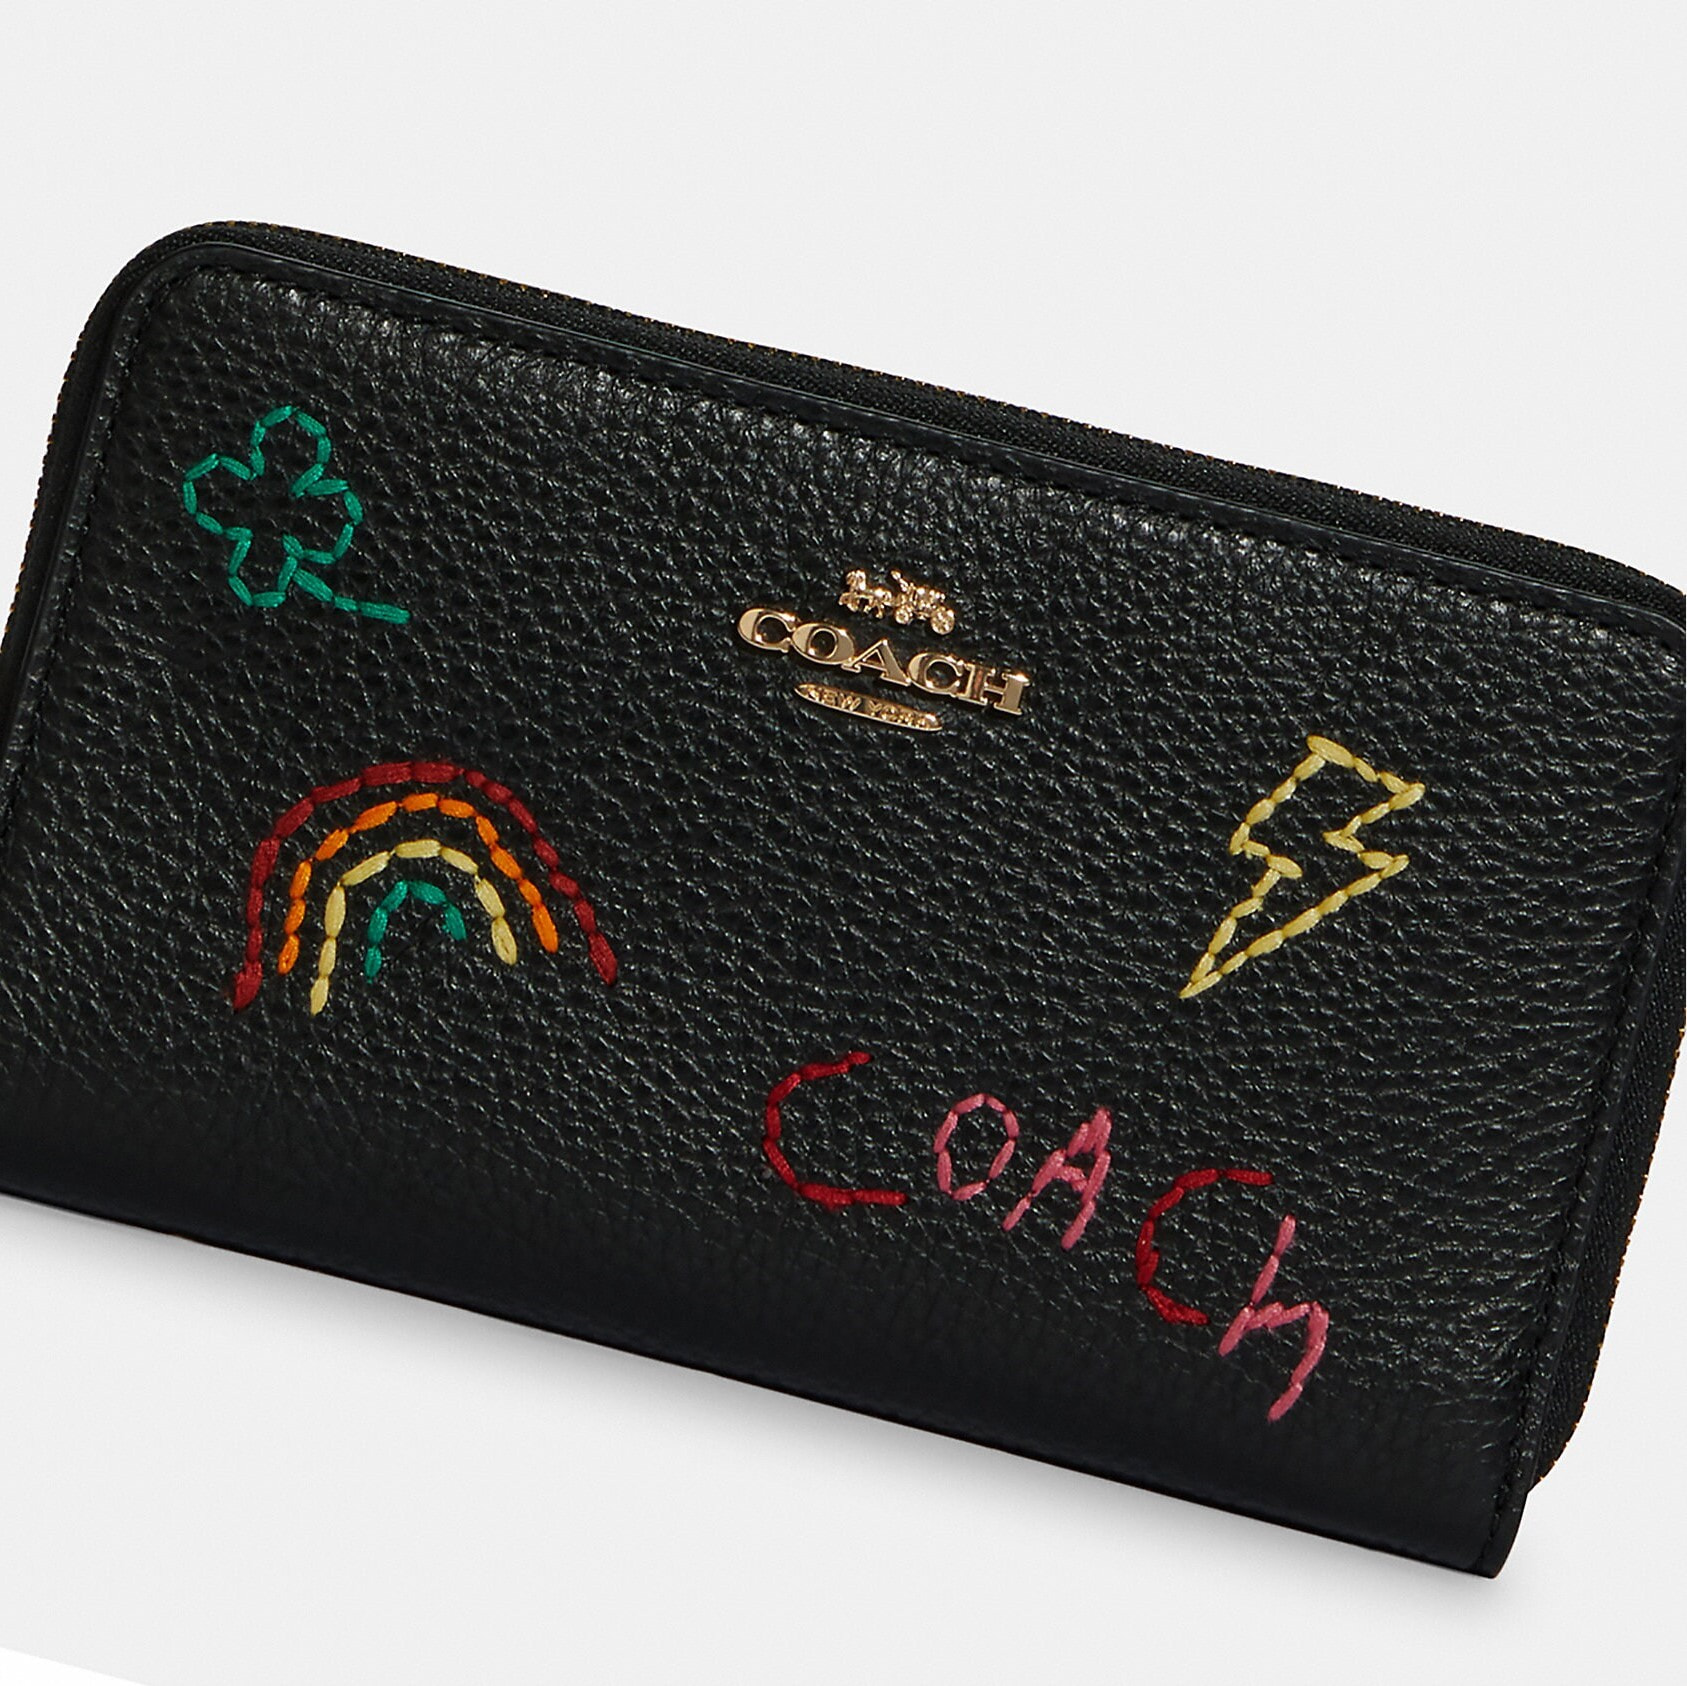 VÍ DÀI BLACK COACH MEDIUM ID ZIP WALLET WITH DIARY EMBROIDERY 6